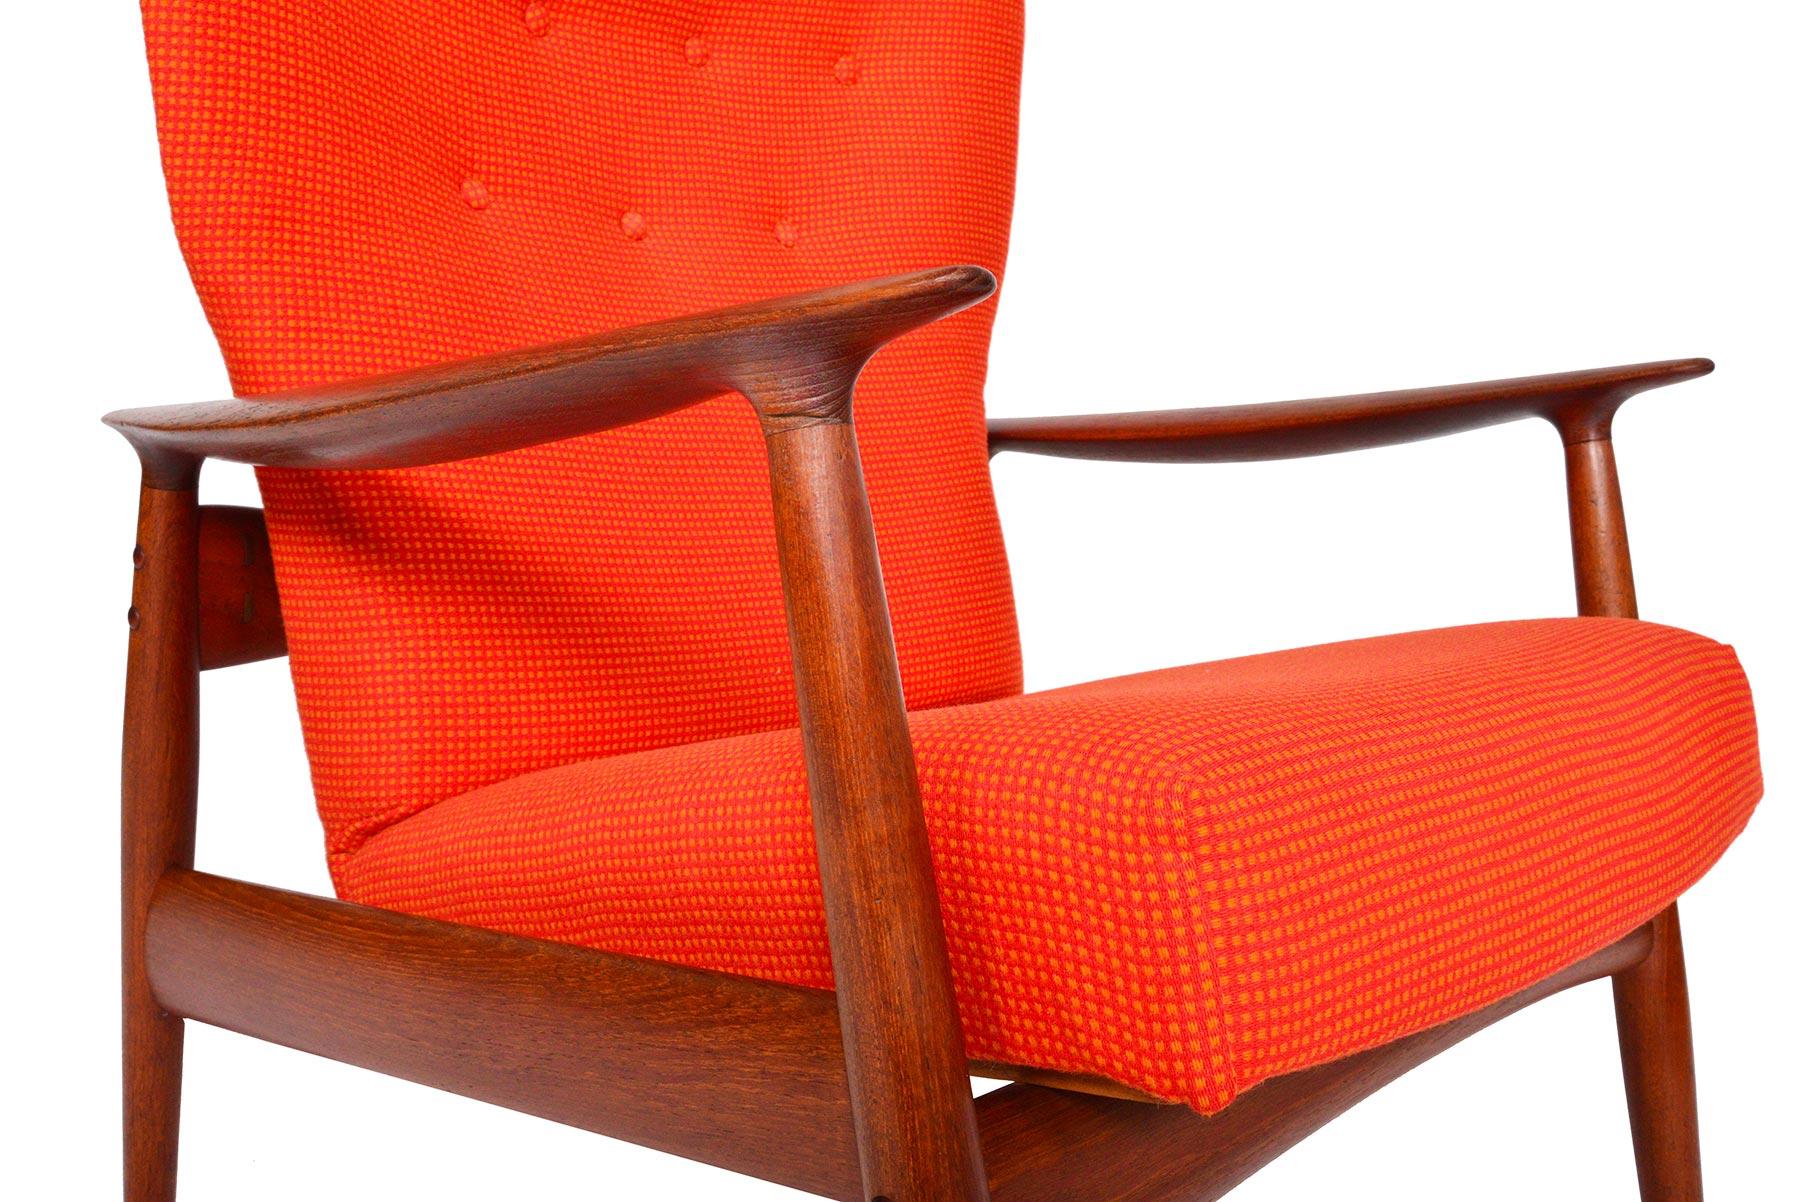 Boldly designed, this ingenious high back lounge chair was conceptualized by Kay Rasmussen for Peter Wessel in the 1960s. The subtle winged high back design offers a spacious yet cozy seating experience. A beautifully sculpted teak frame supports